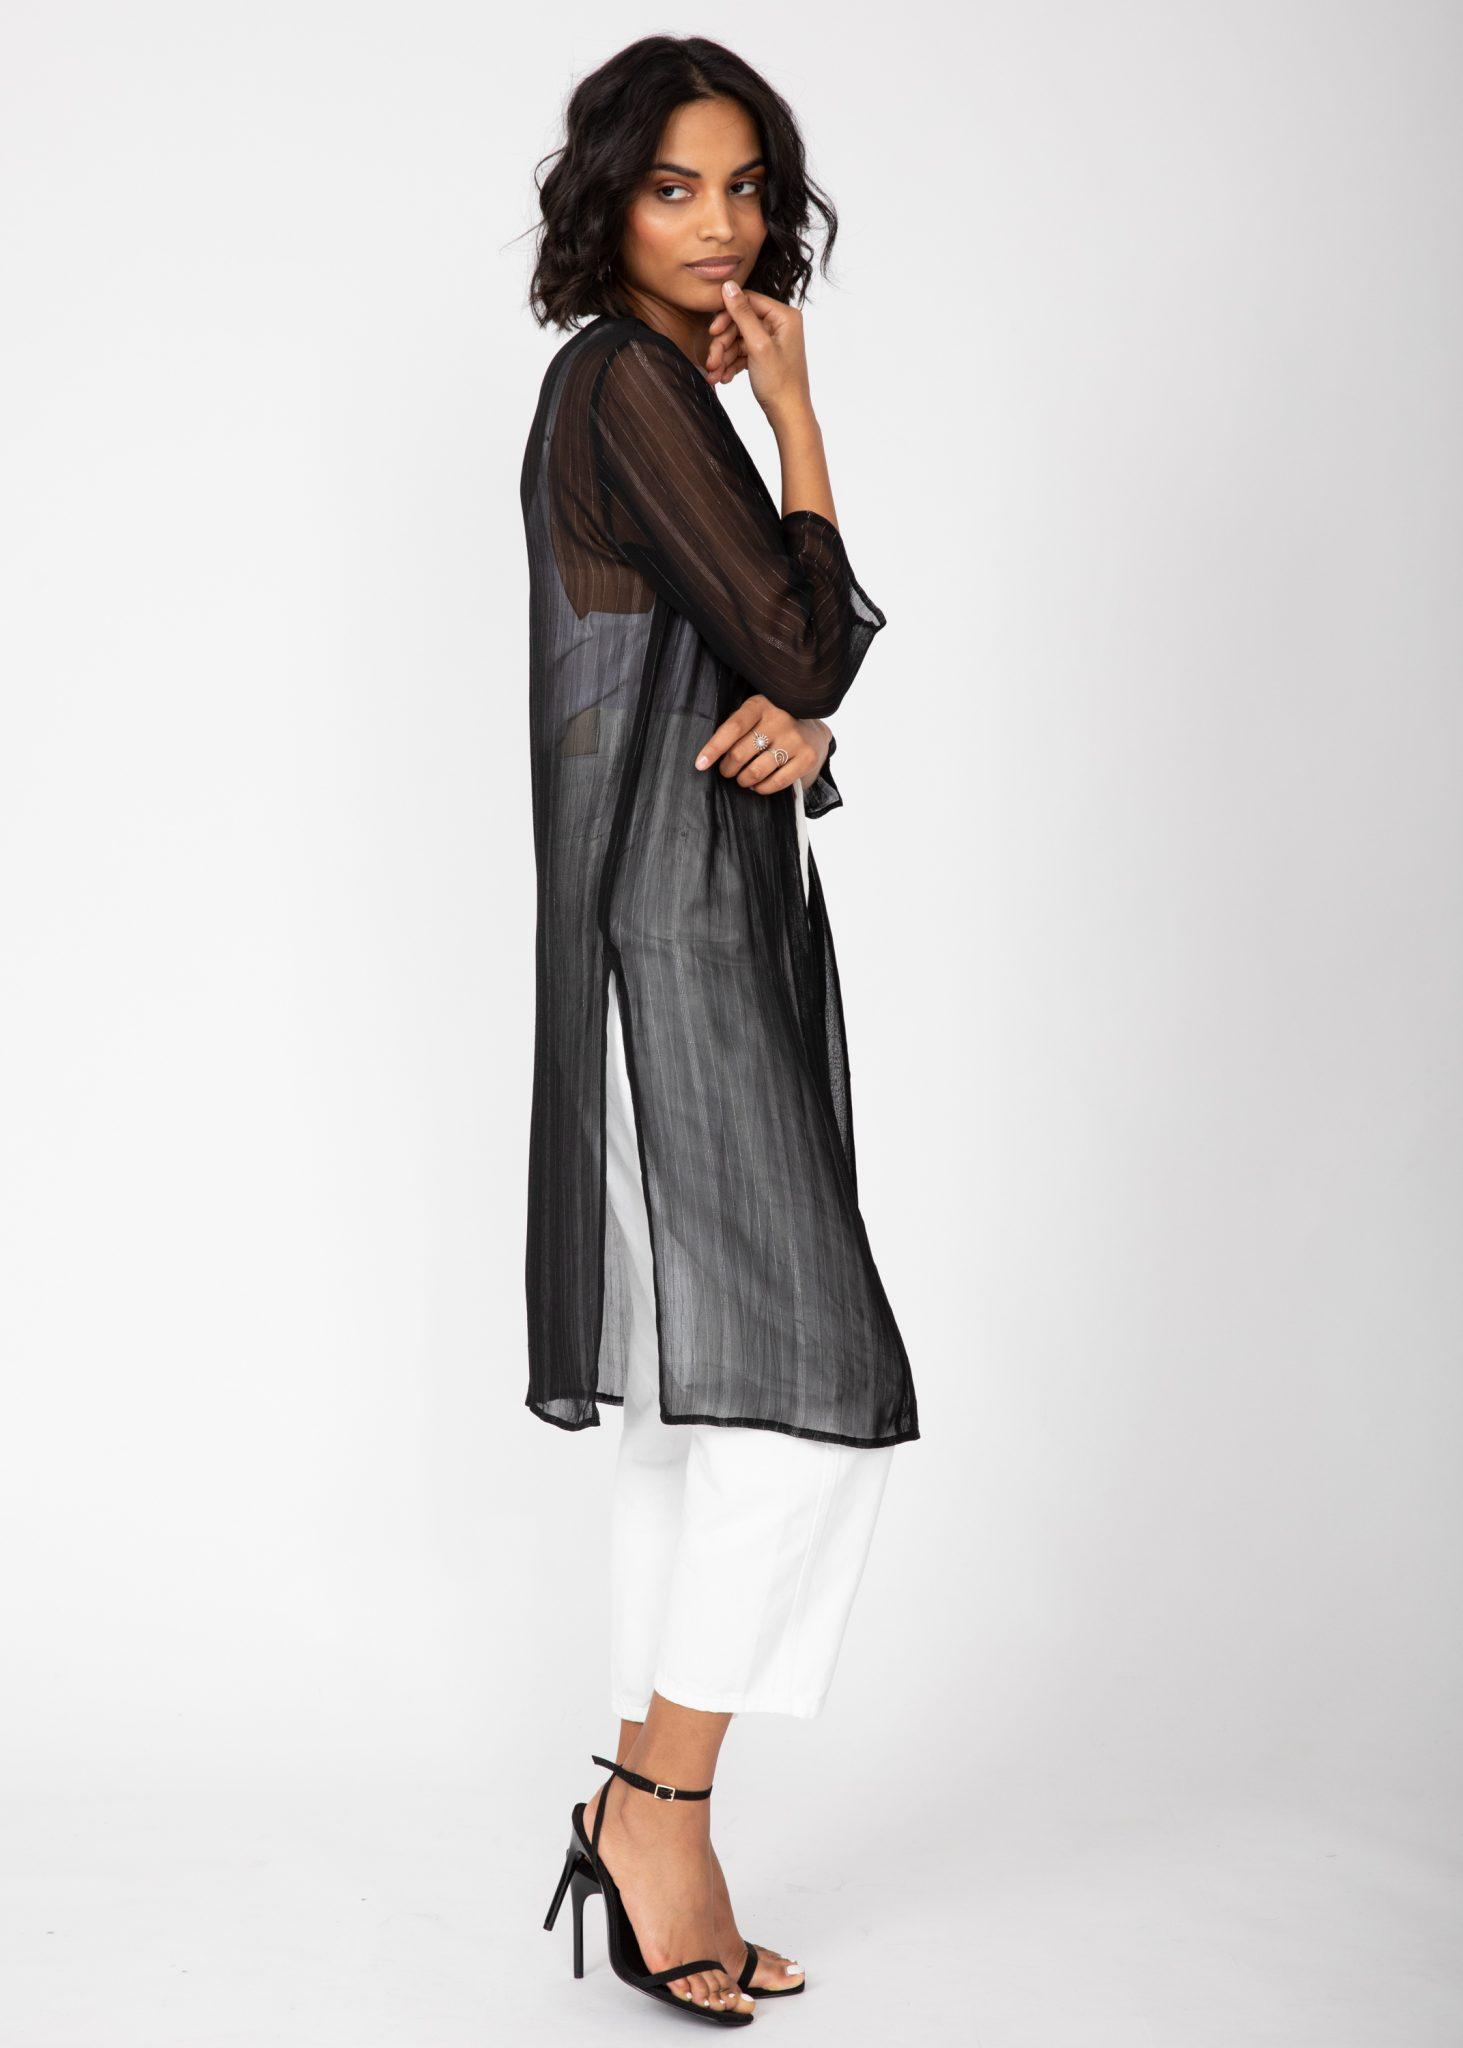 Kimono Cover Up in Sheer Black with Silver Sparkle – likemary